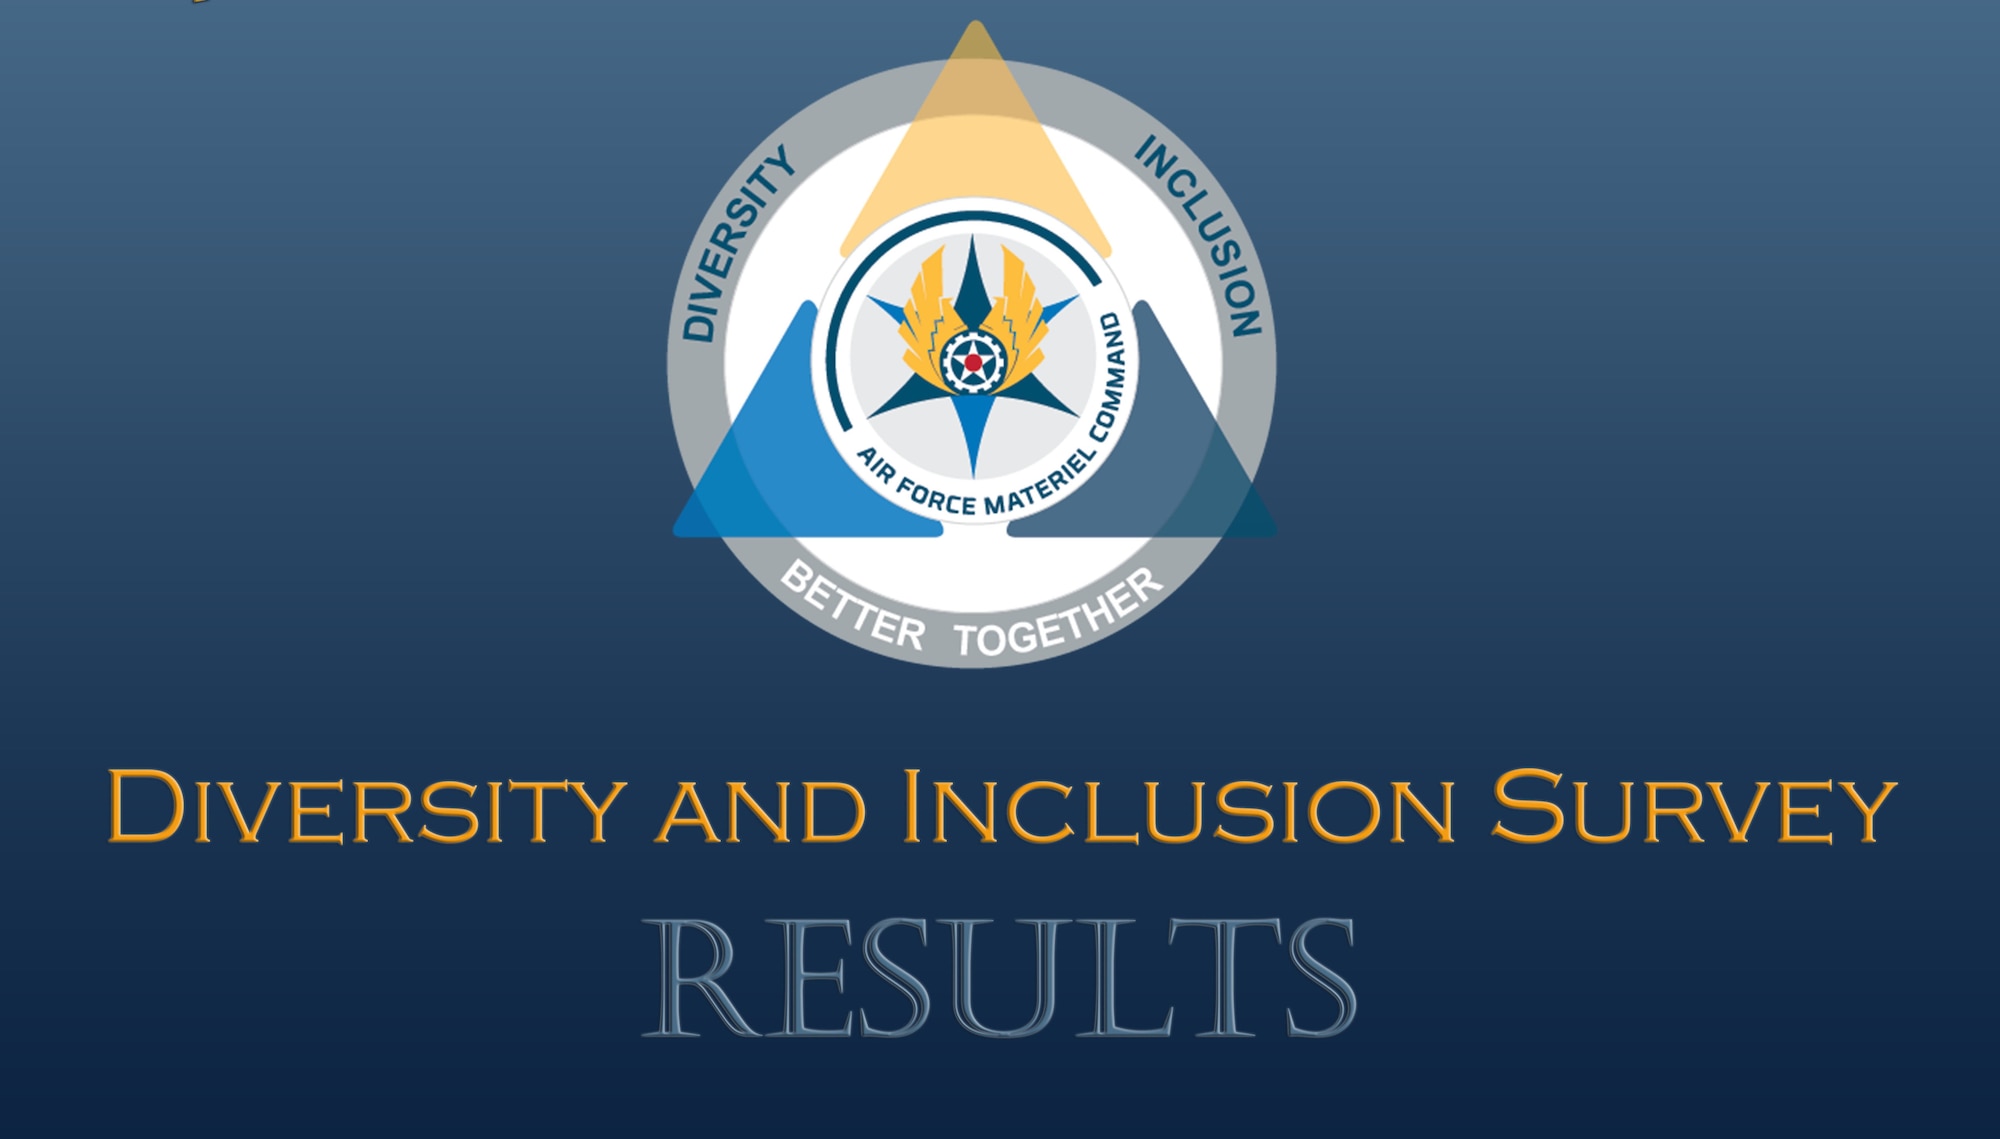 graphic: The Air Force Materiel Command has released the results of its initial command-wide diversity and inclusion (D&I) survey, identifying areas of focus and improvement for initiatives across the command.